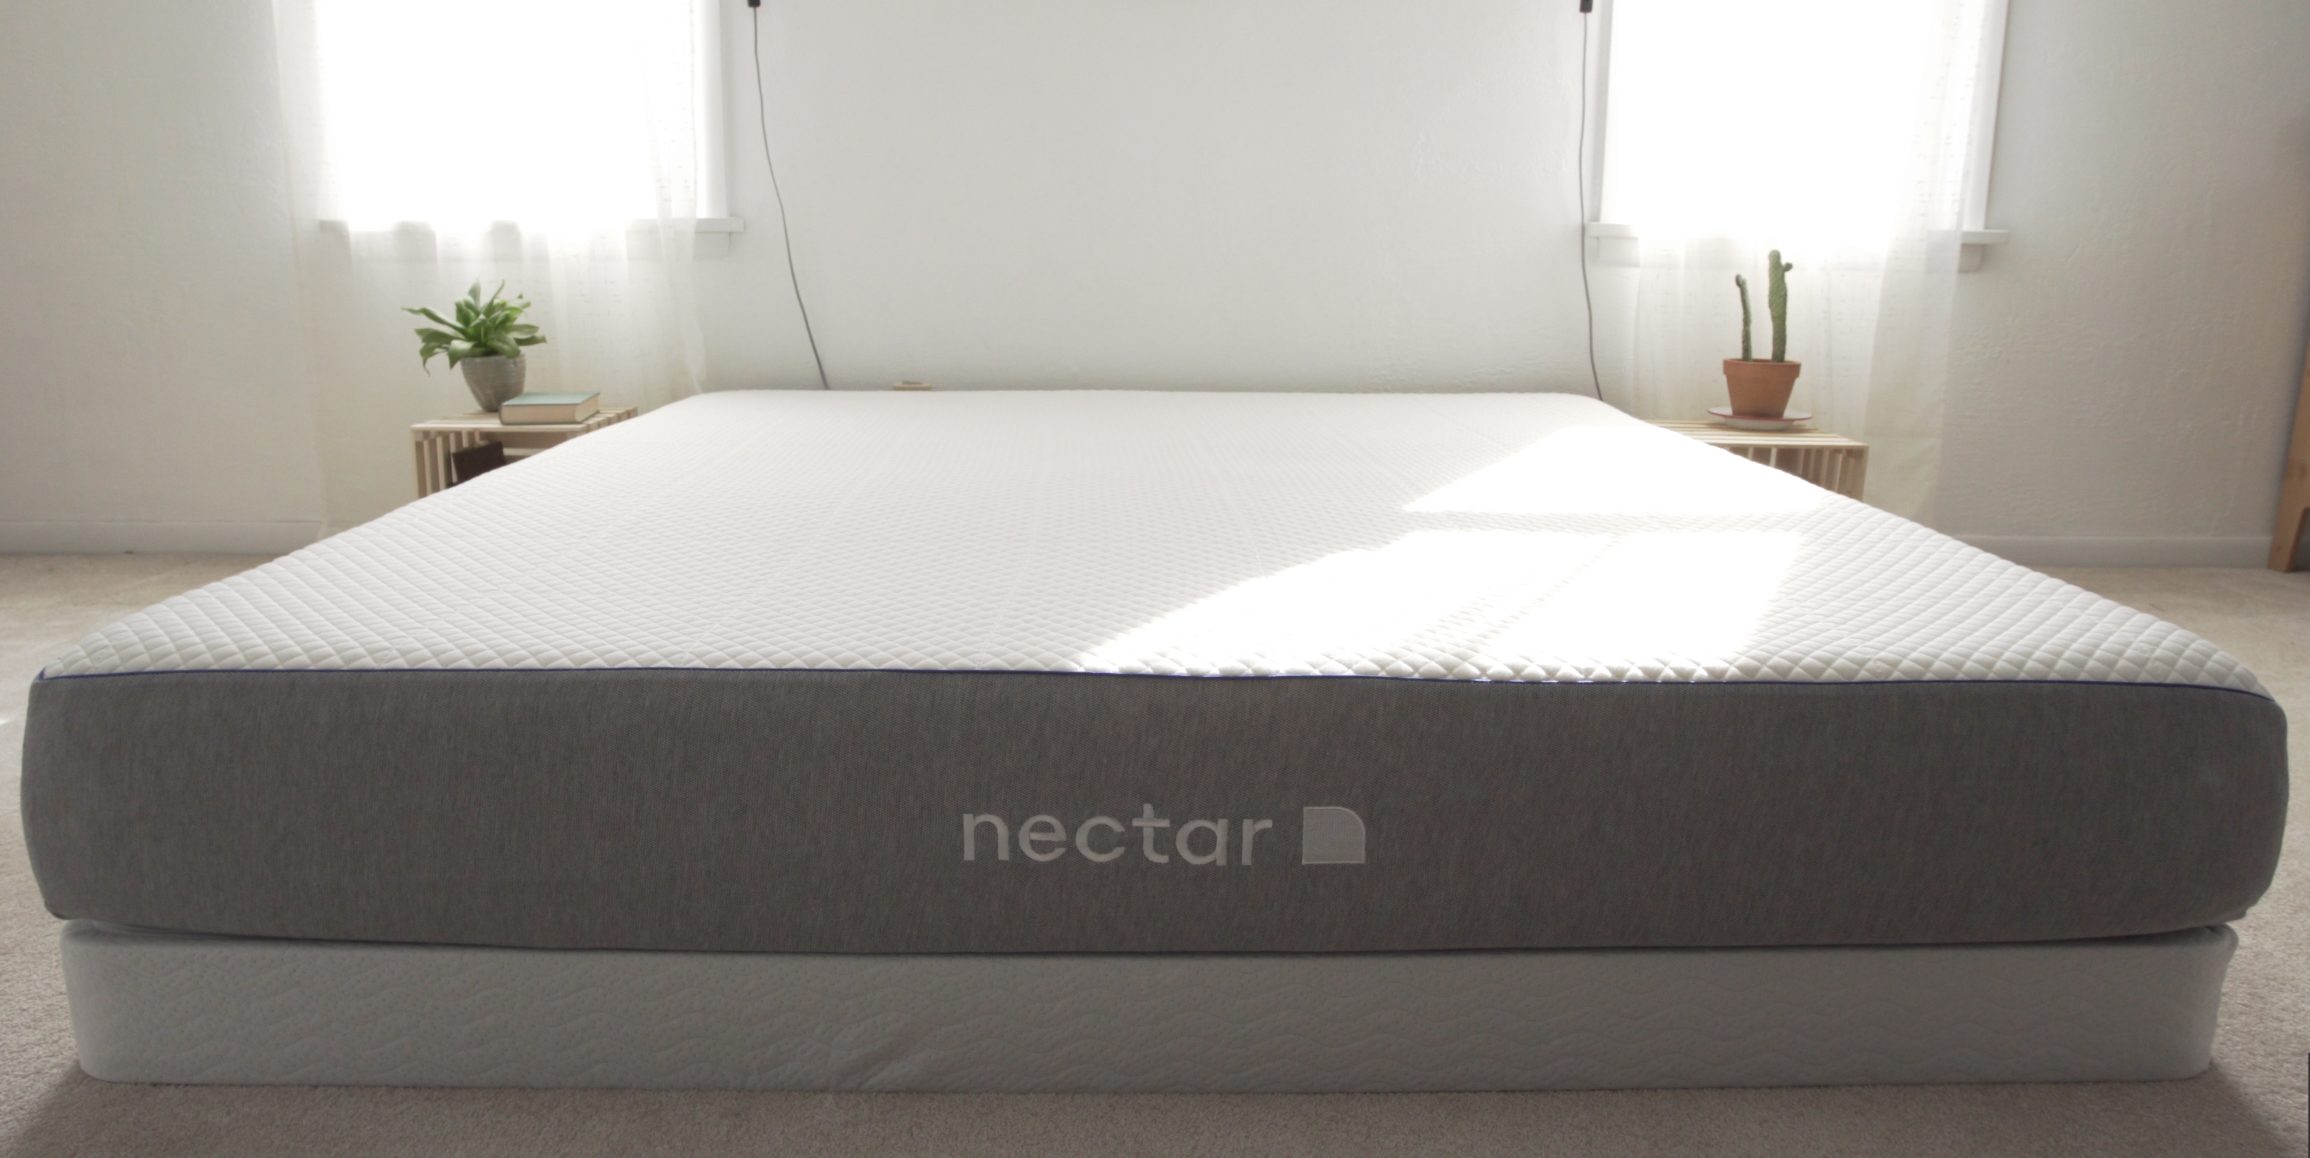 nectar mattress review you tube